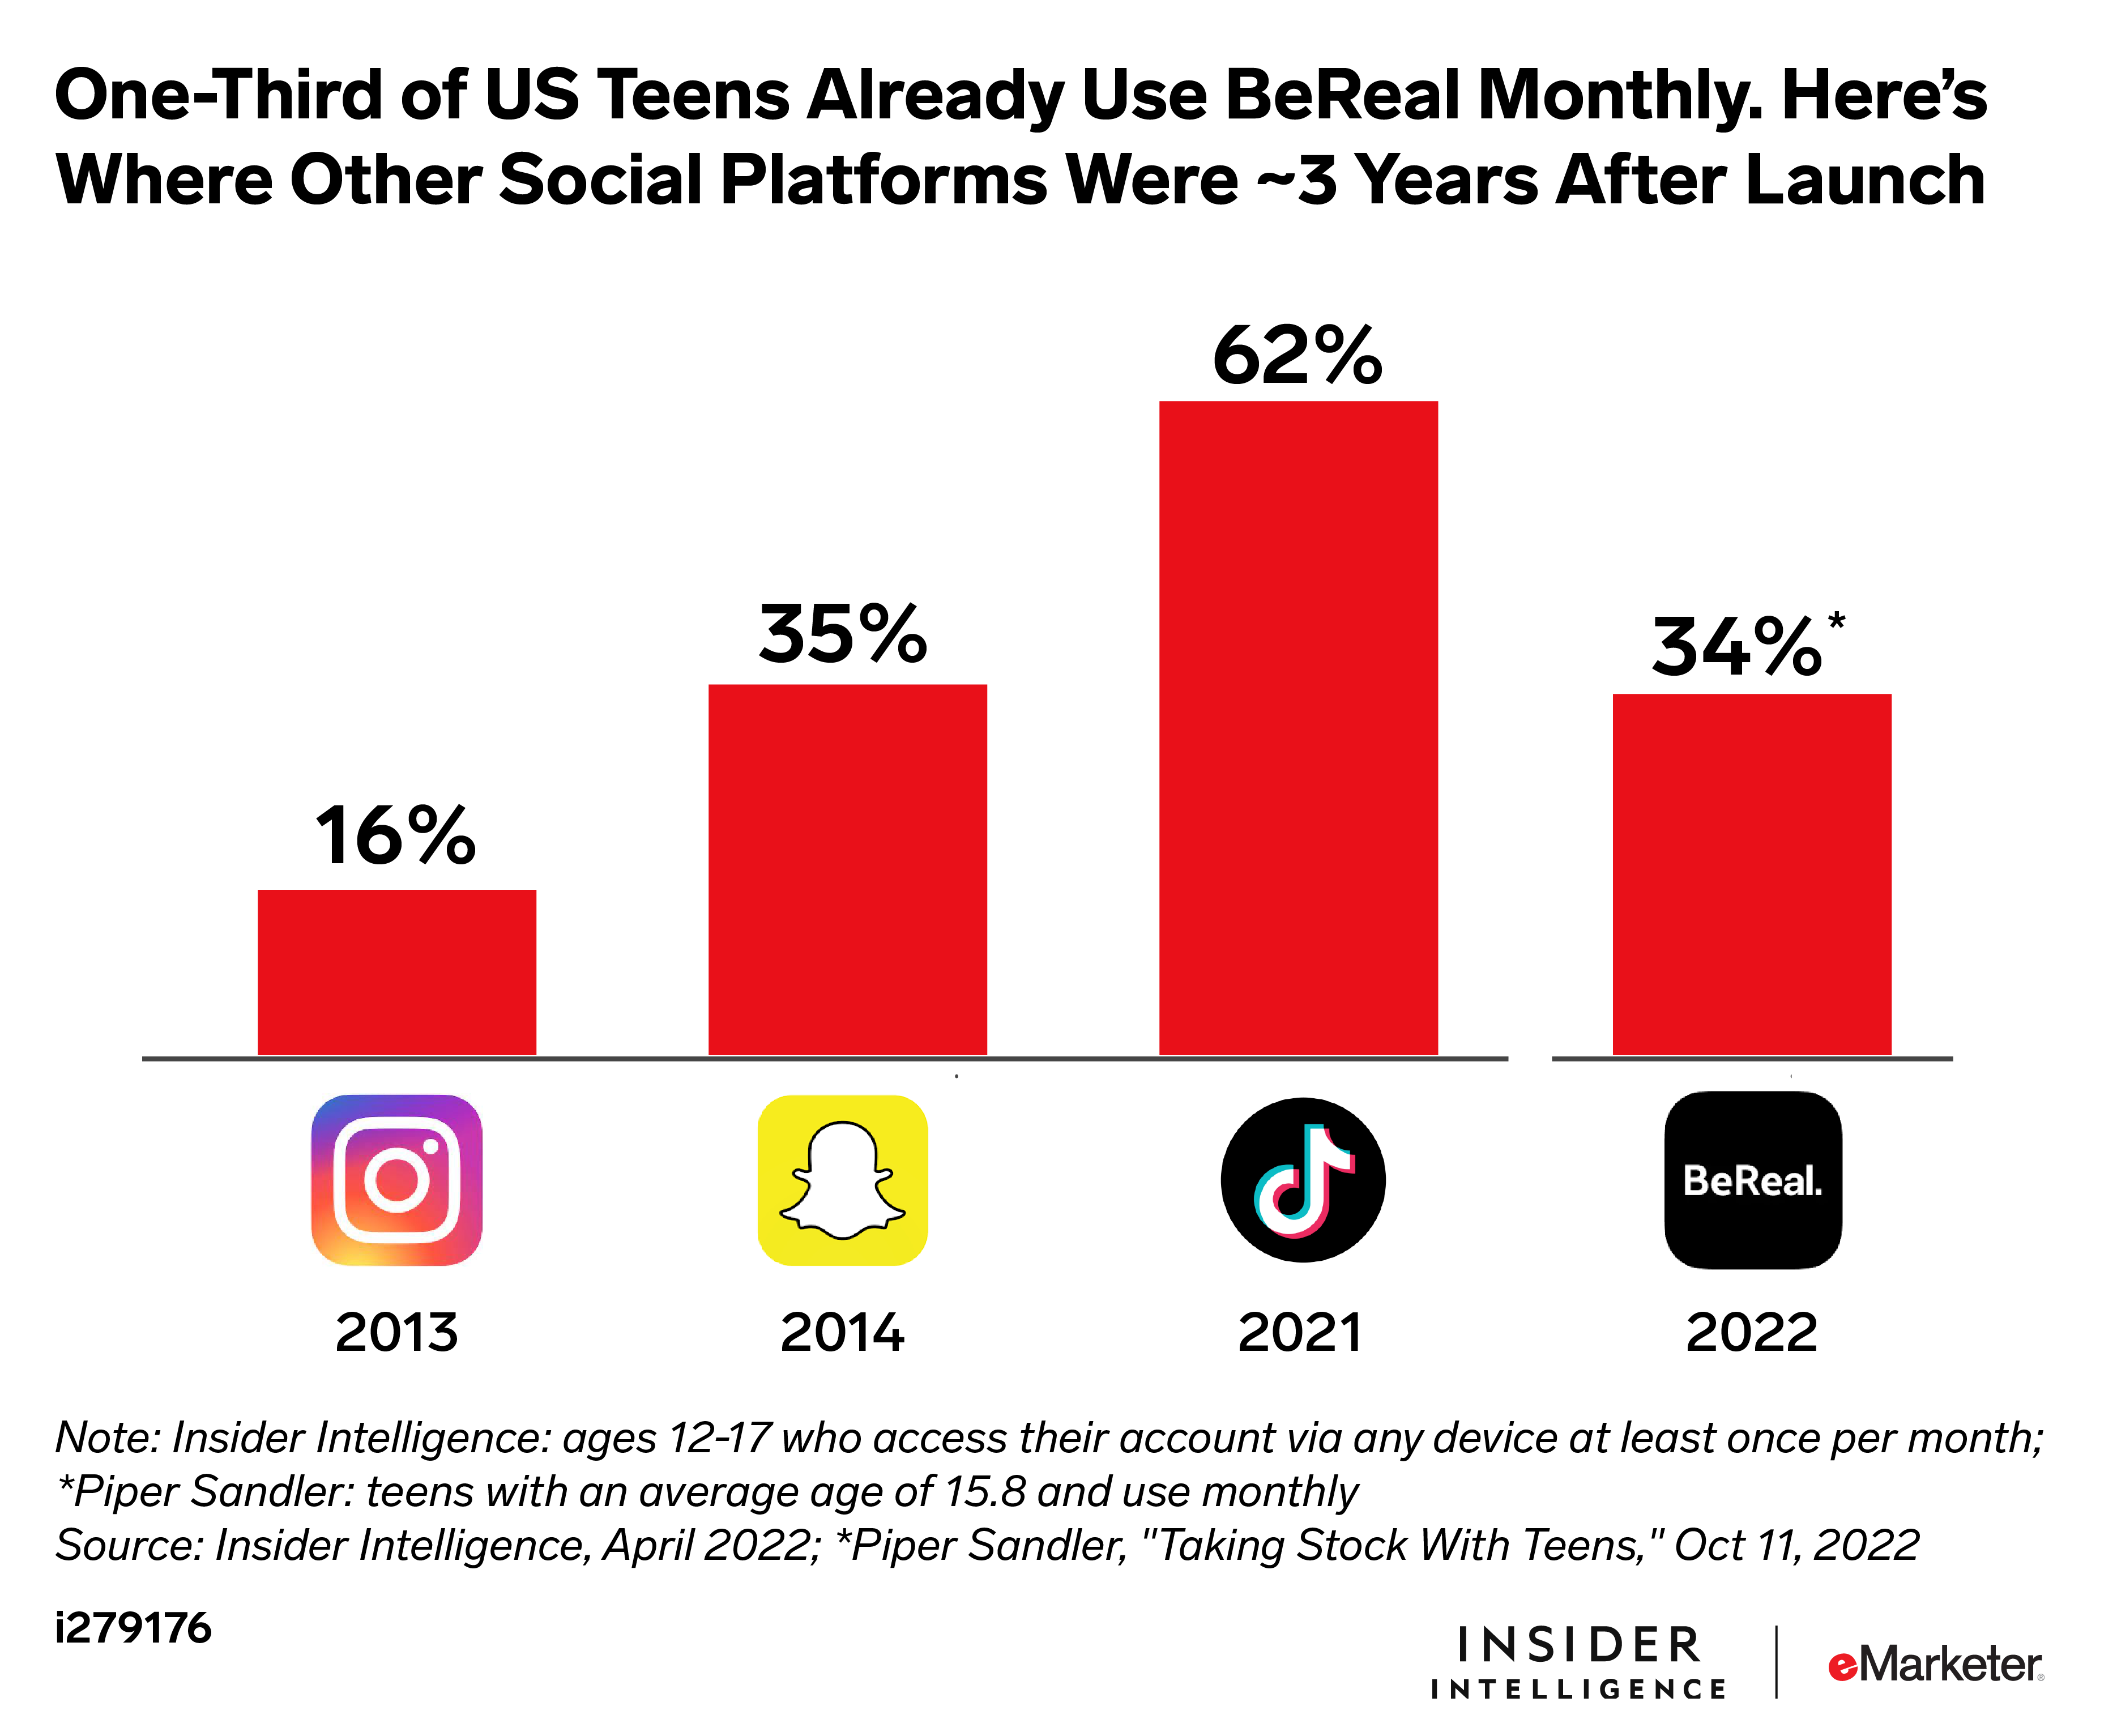 One-third of US teens already use BeReal monthly.Here's where other social platforms were 3 years after launch.